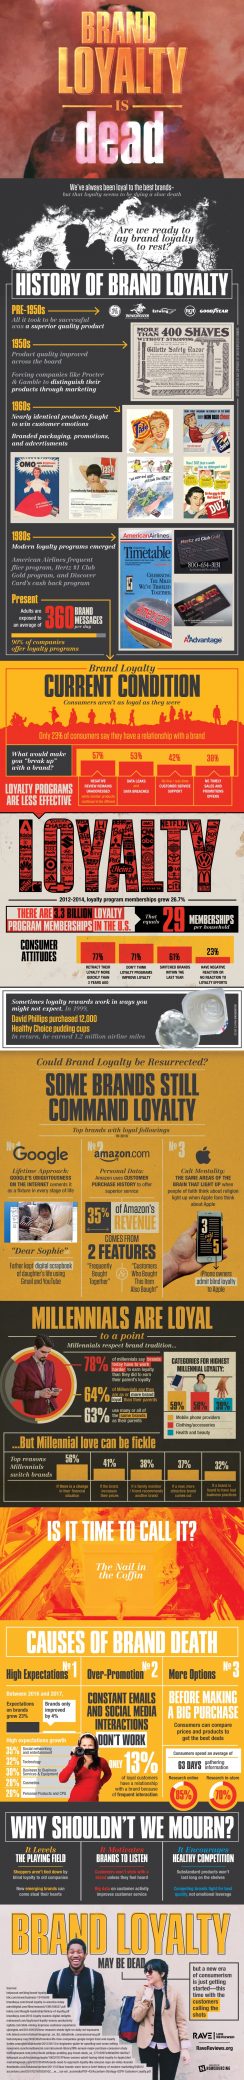 The New Brand Loyalty [Infographic]